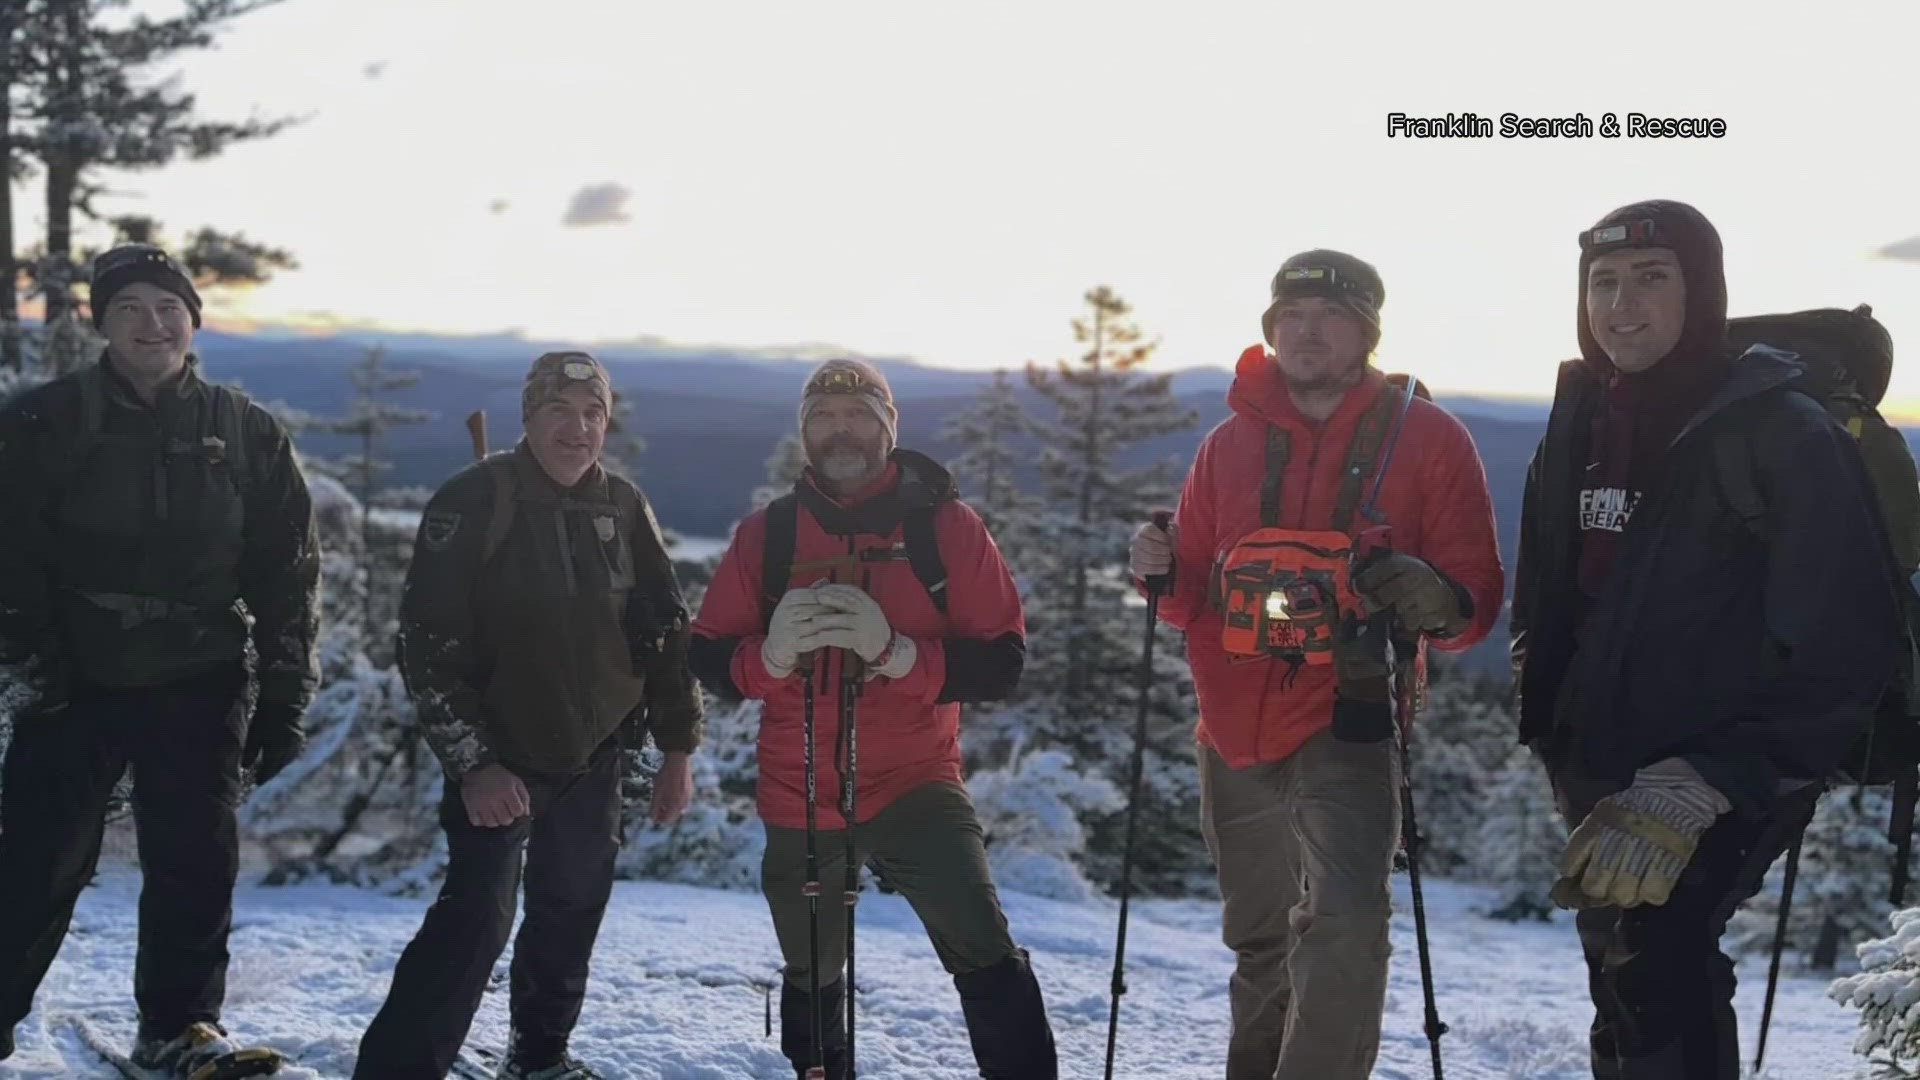 Rescuers were in a "race against time" to reach and warm the stranded hiker before life-threatening hypothermia set in, according to Franklin Search and Rescue.